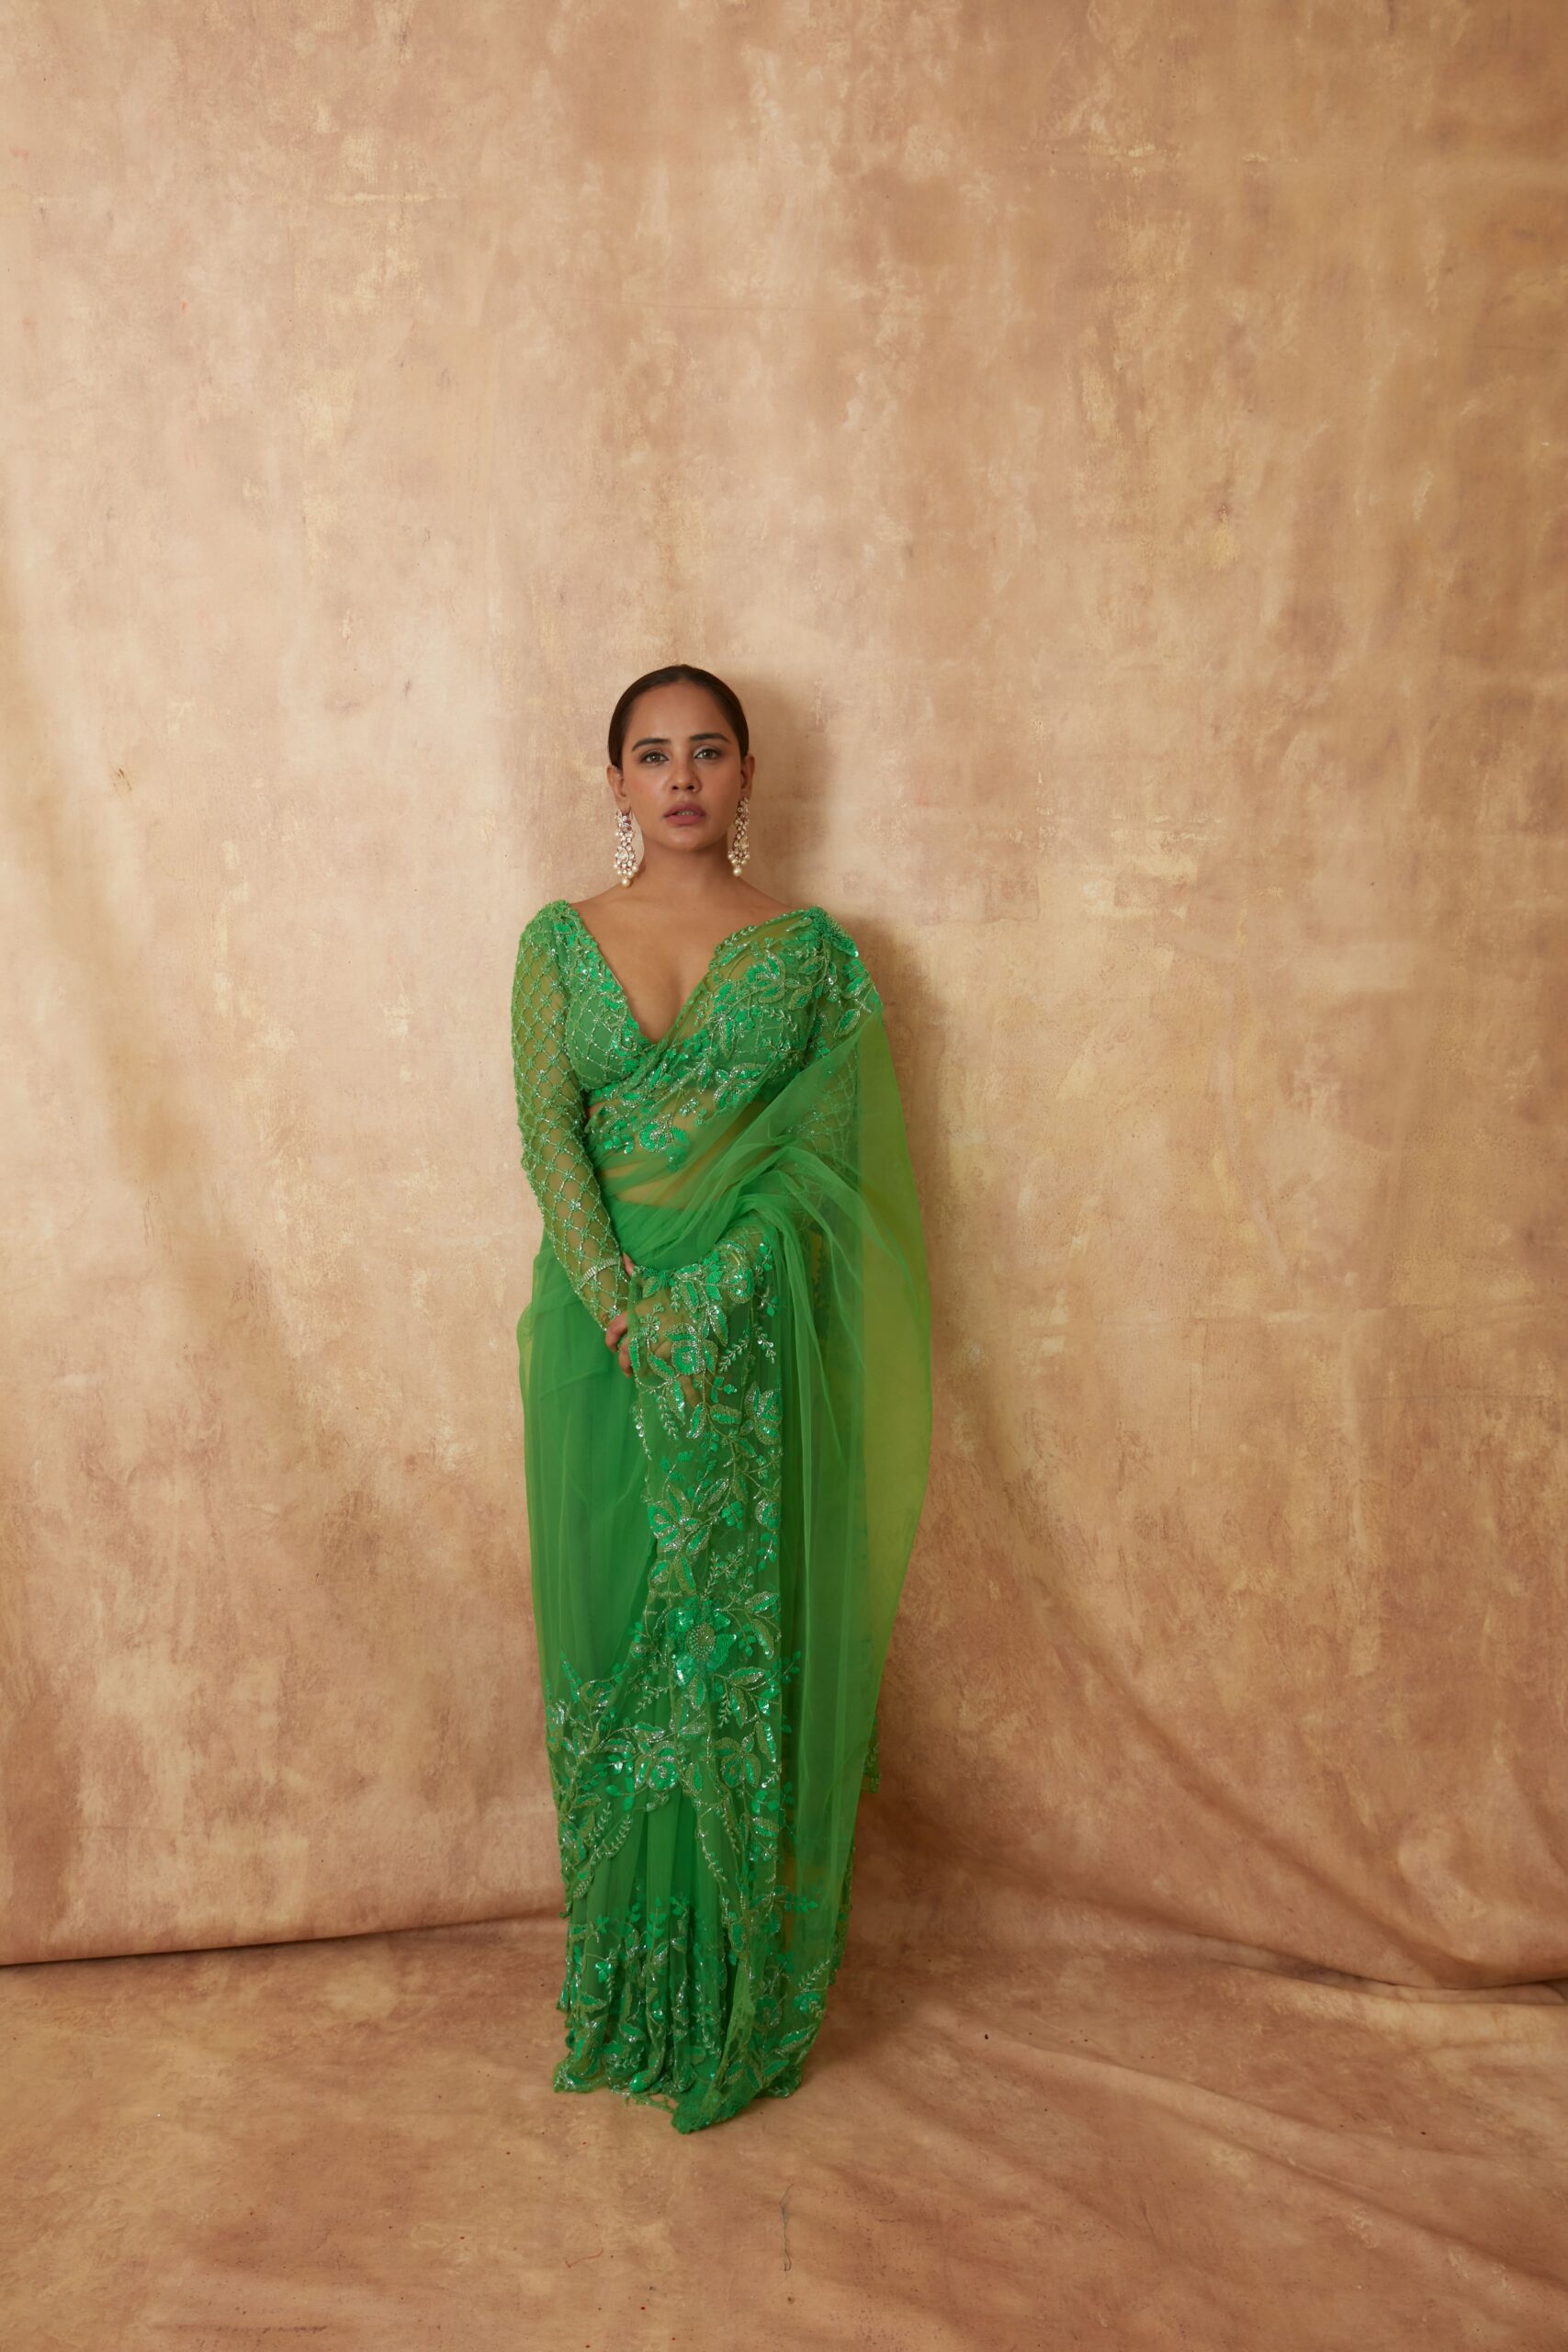 Vibrant Green Saree with intricate embroidary work along the delicate net fabric